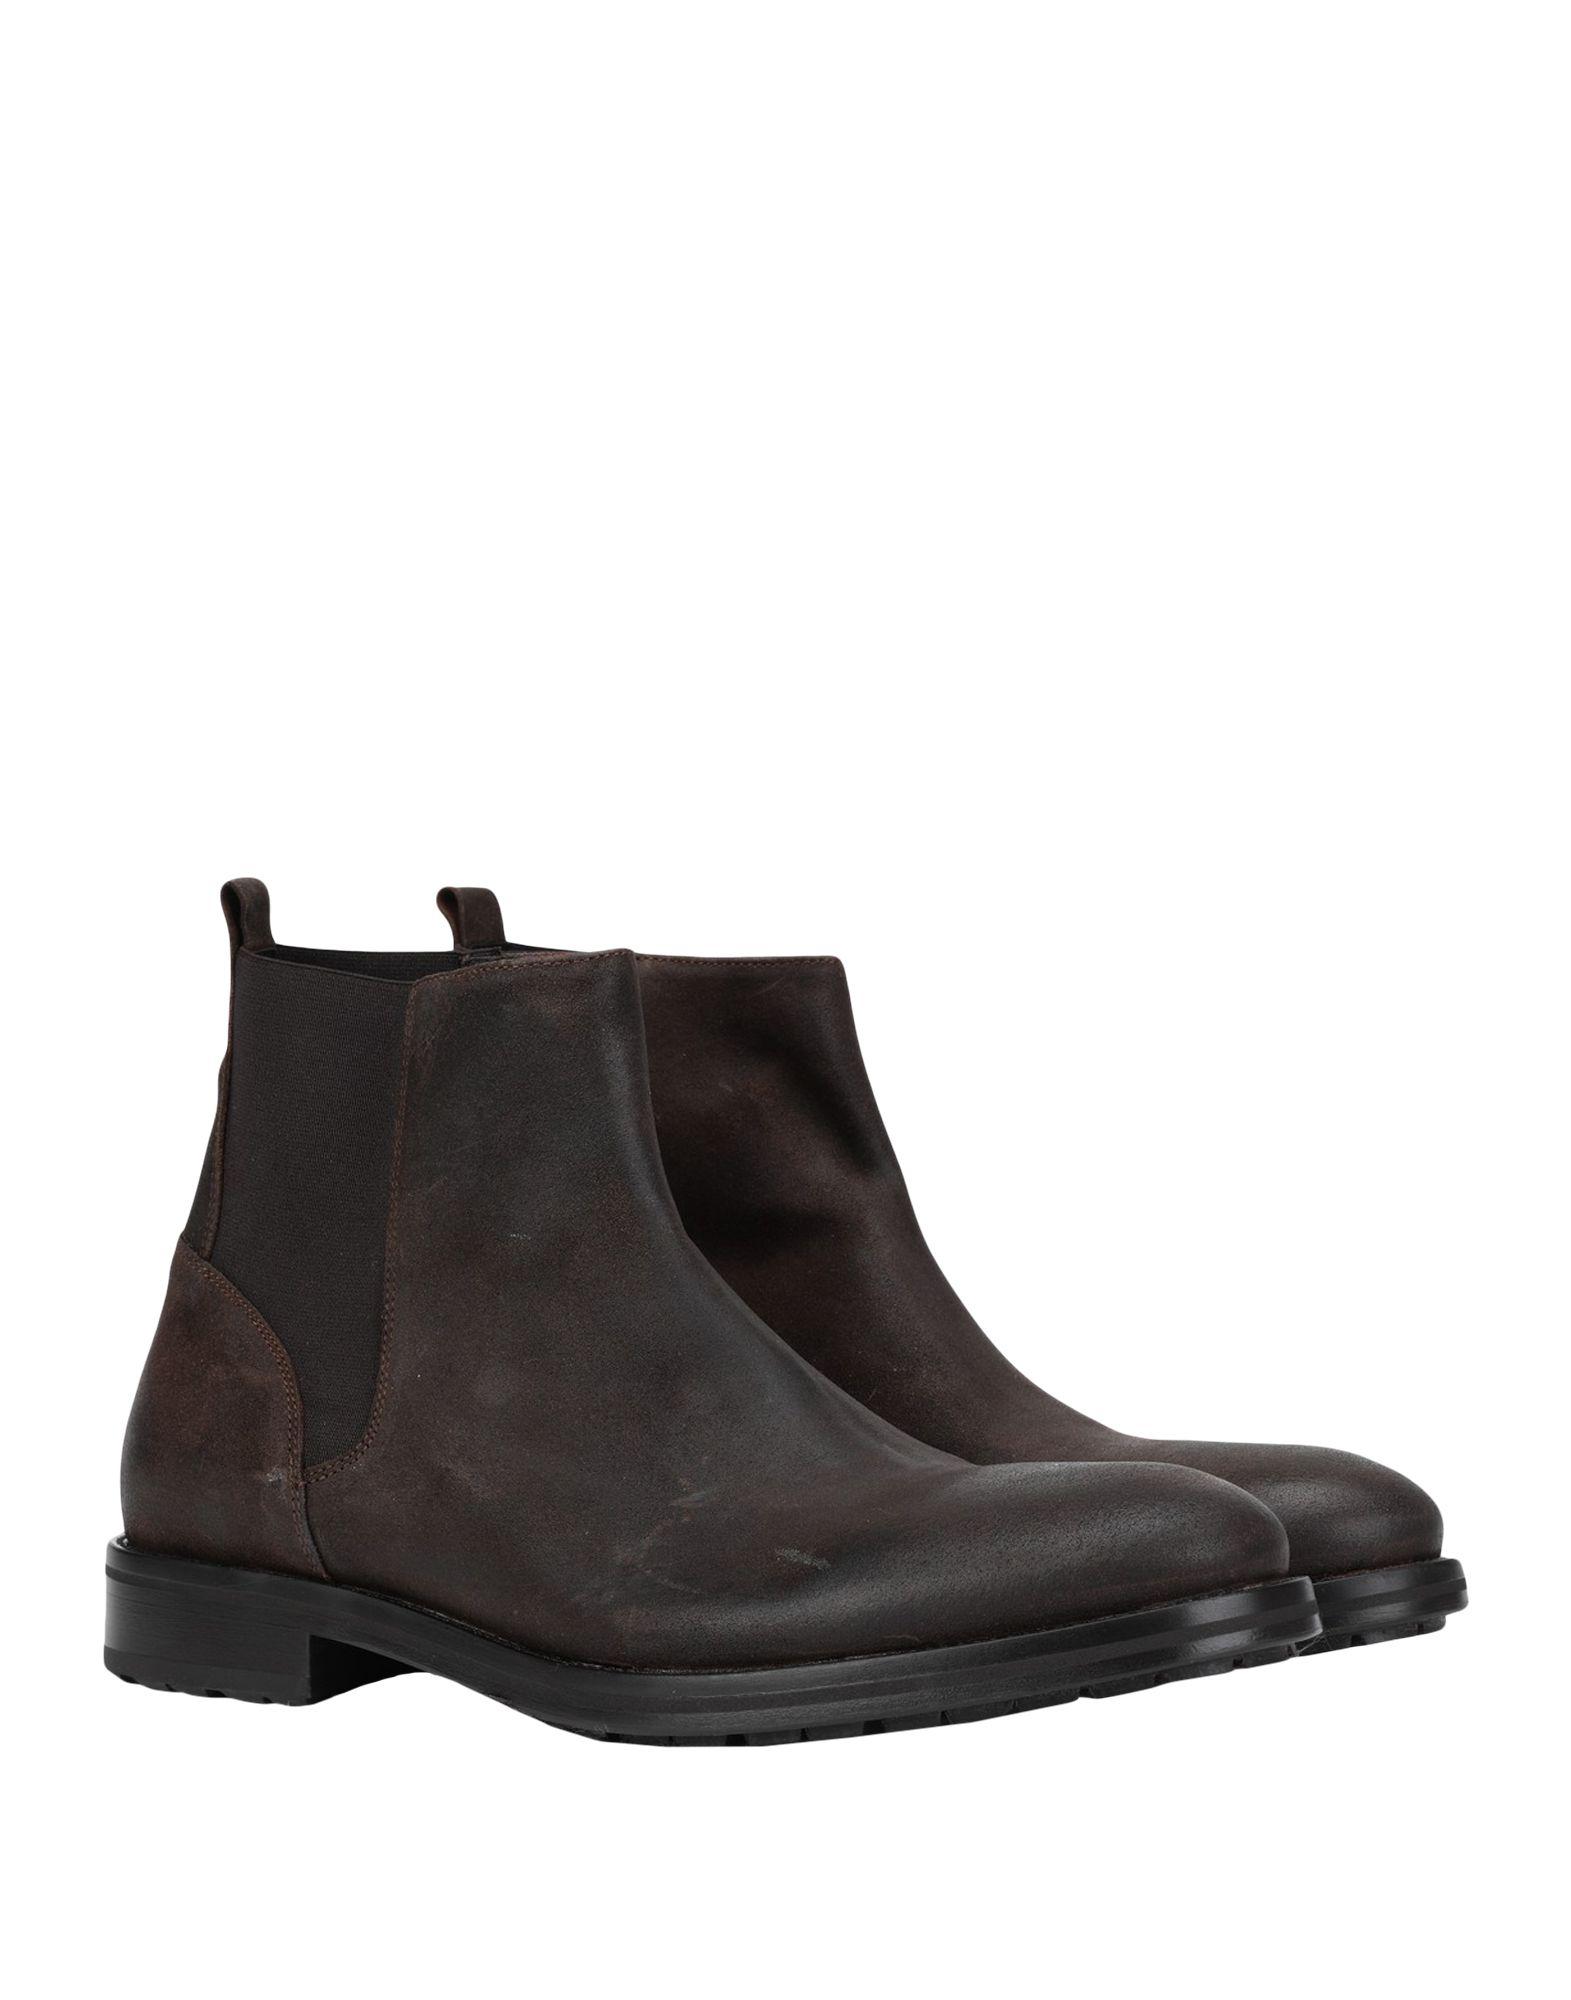 Maldini Suede Ankle Boots in Dark Brown (Brown) for Men - Lyst